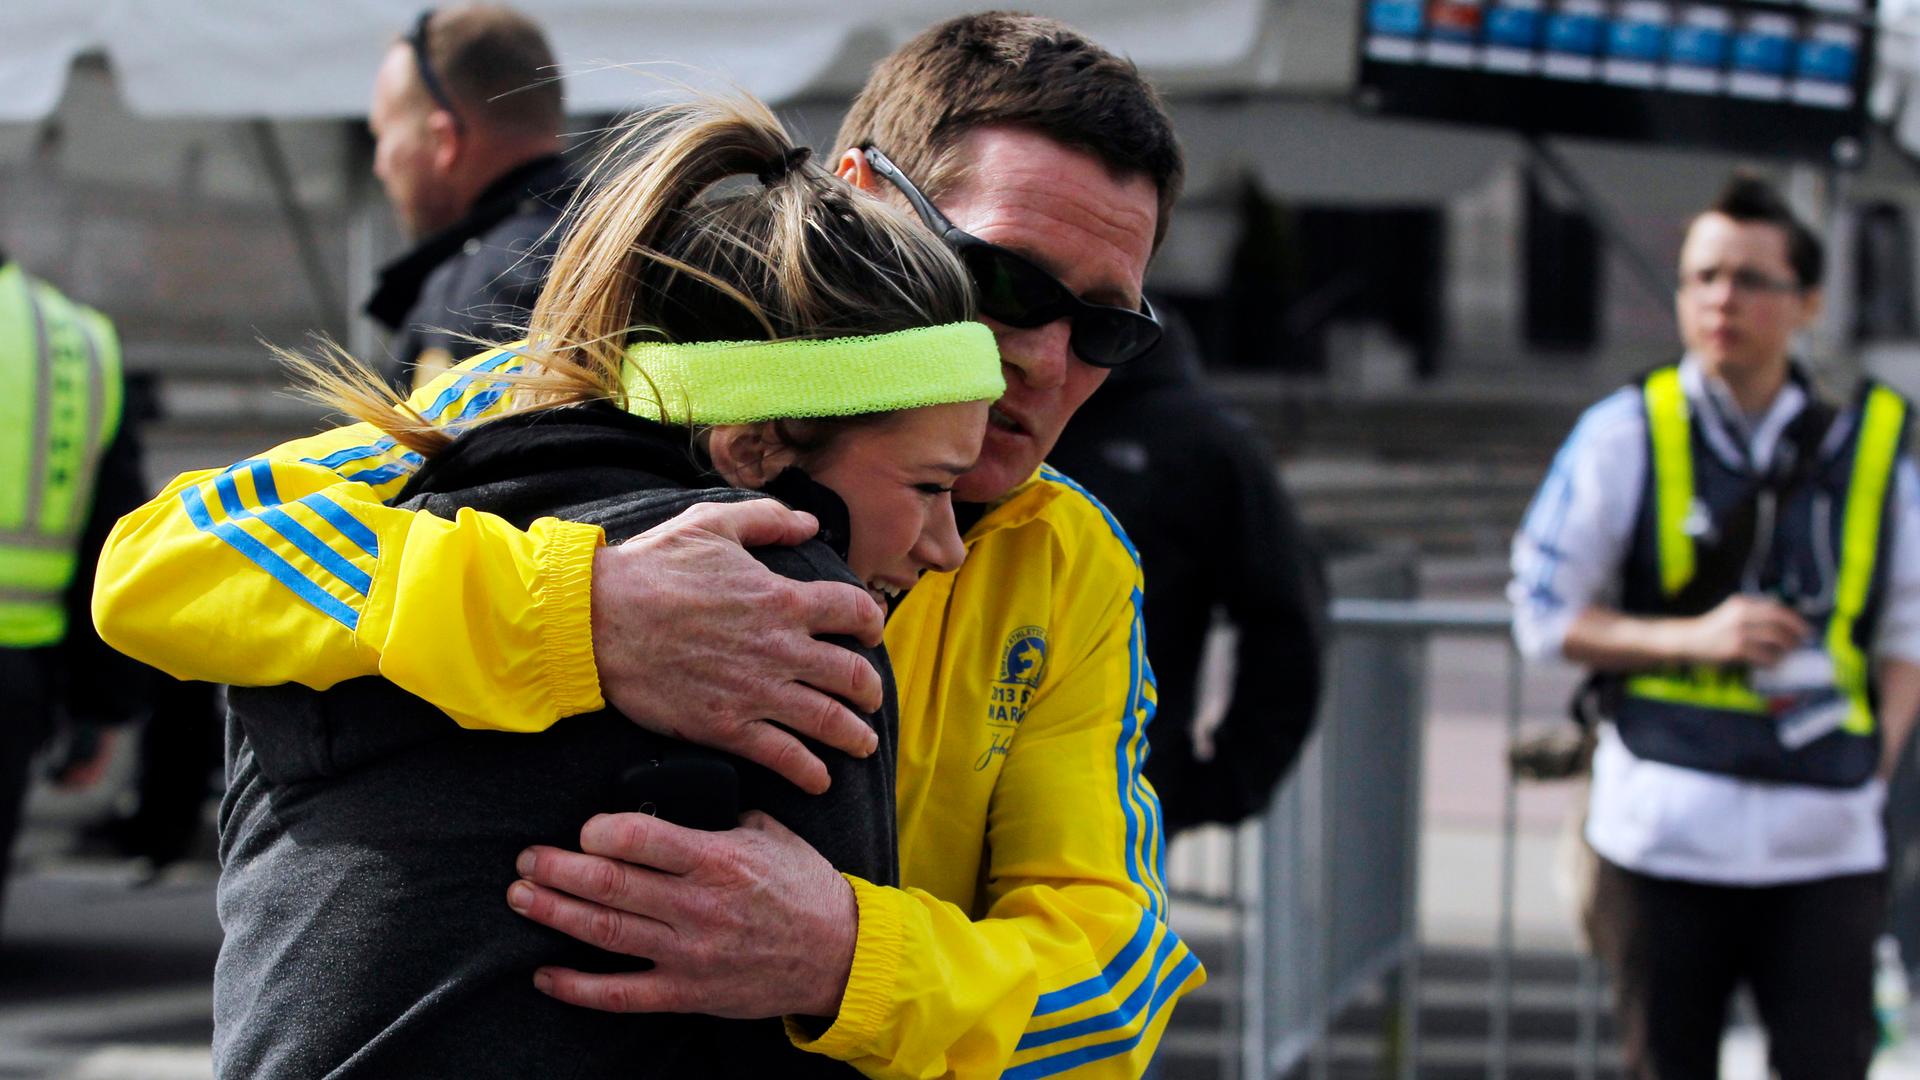 A woman is comforted by a man near a triage tent set up for the Boston Marathon after the April 2013 bombings